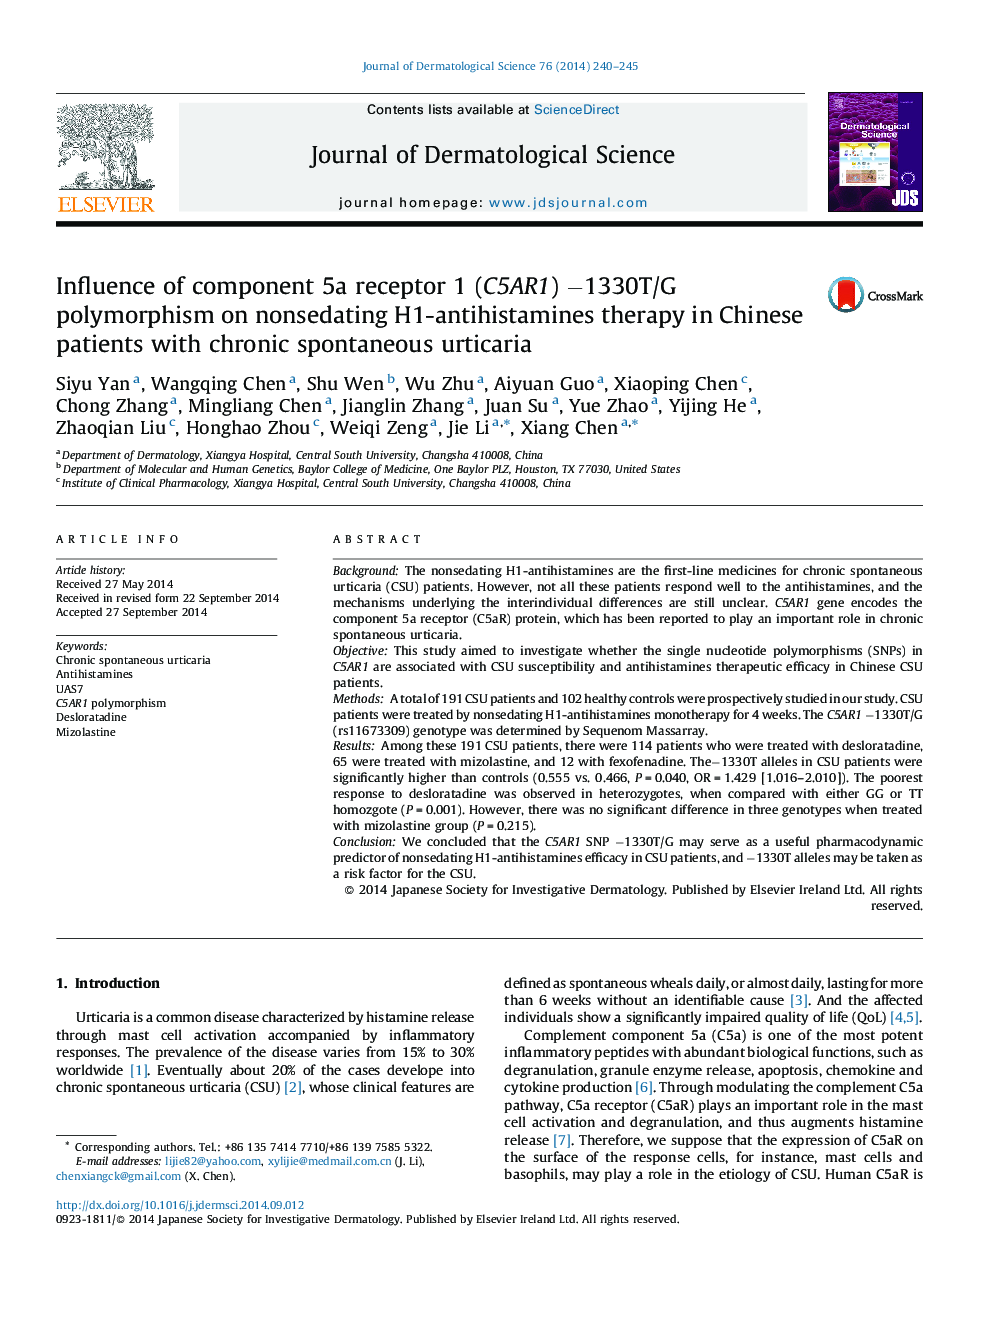 Influence of component 5a receptor 1 (C5AR1) −1330T/G polymorphism on nonsedating H1-antihistamines therapy in Chinese patients with chronic spontaneous urticaria